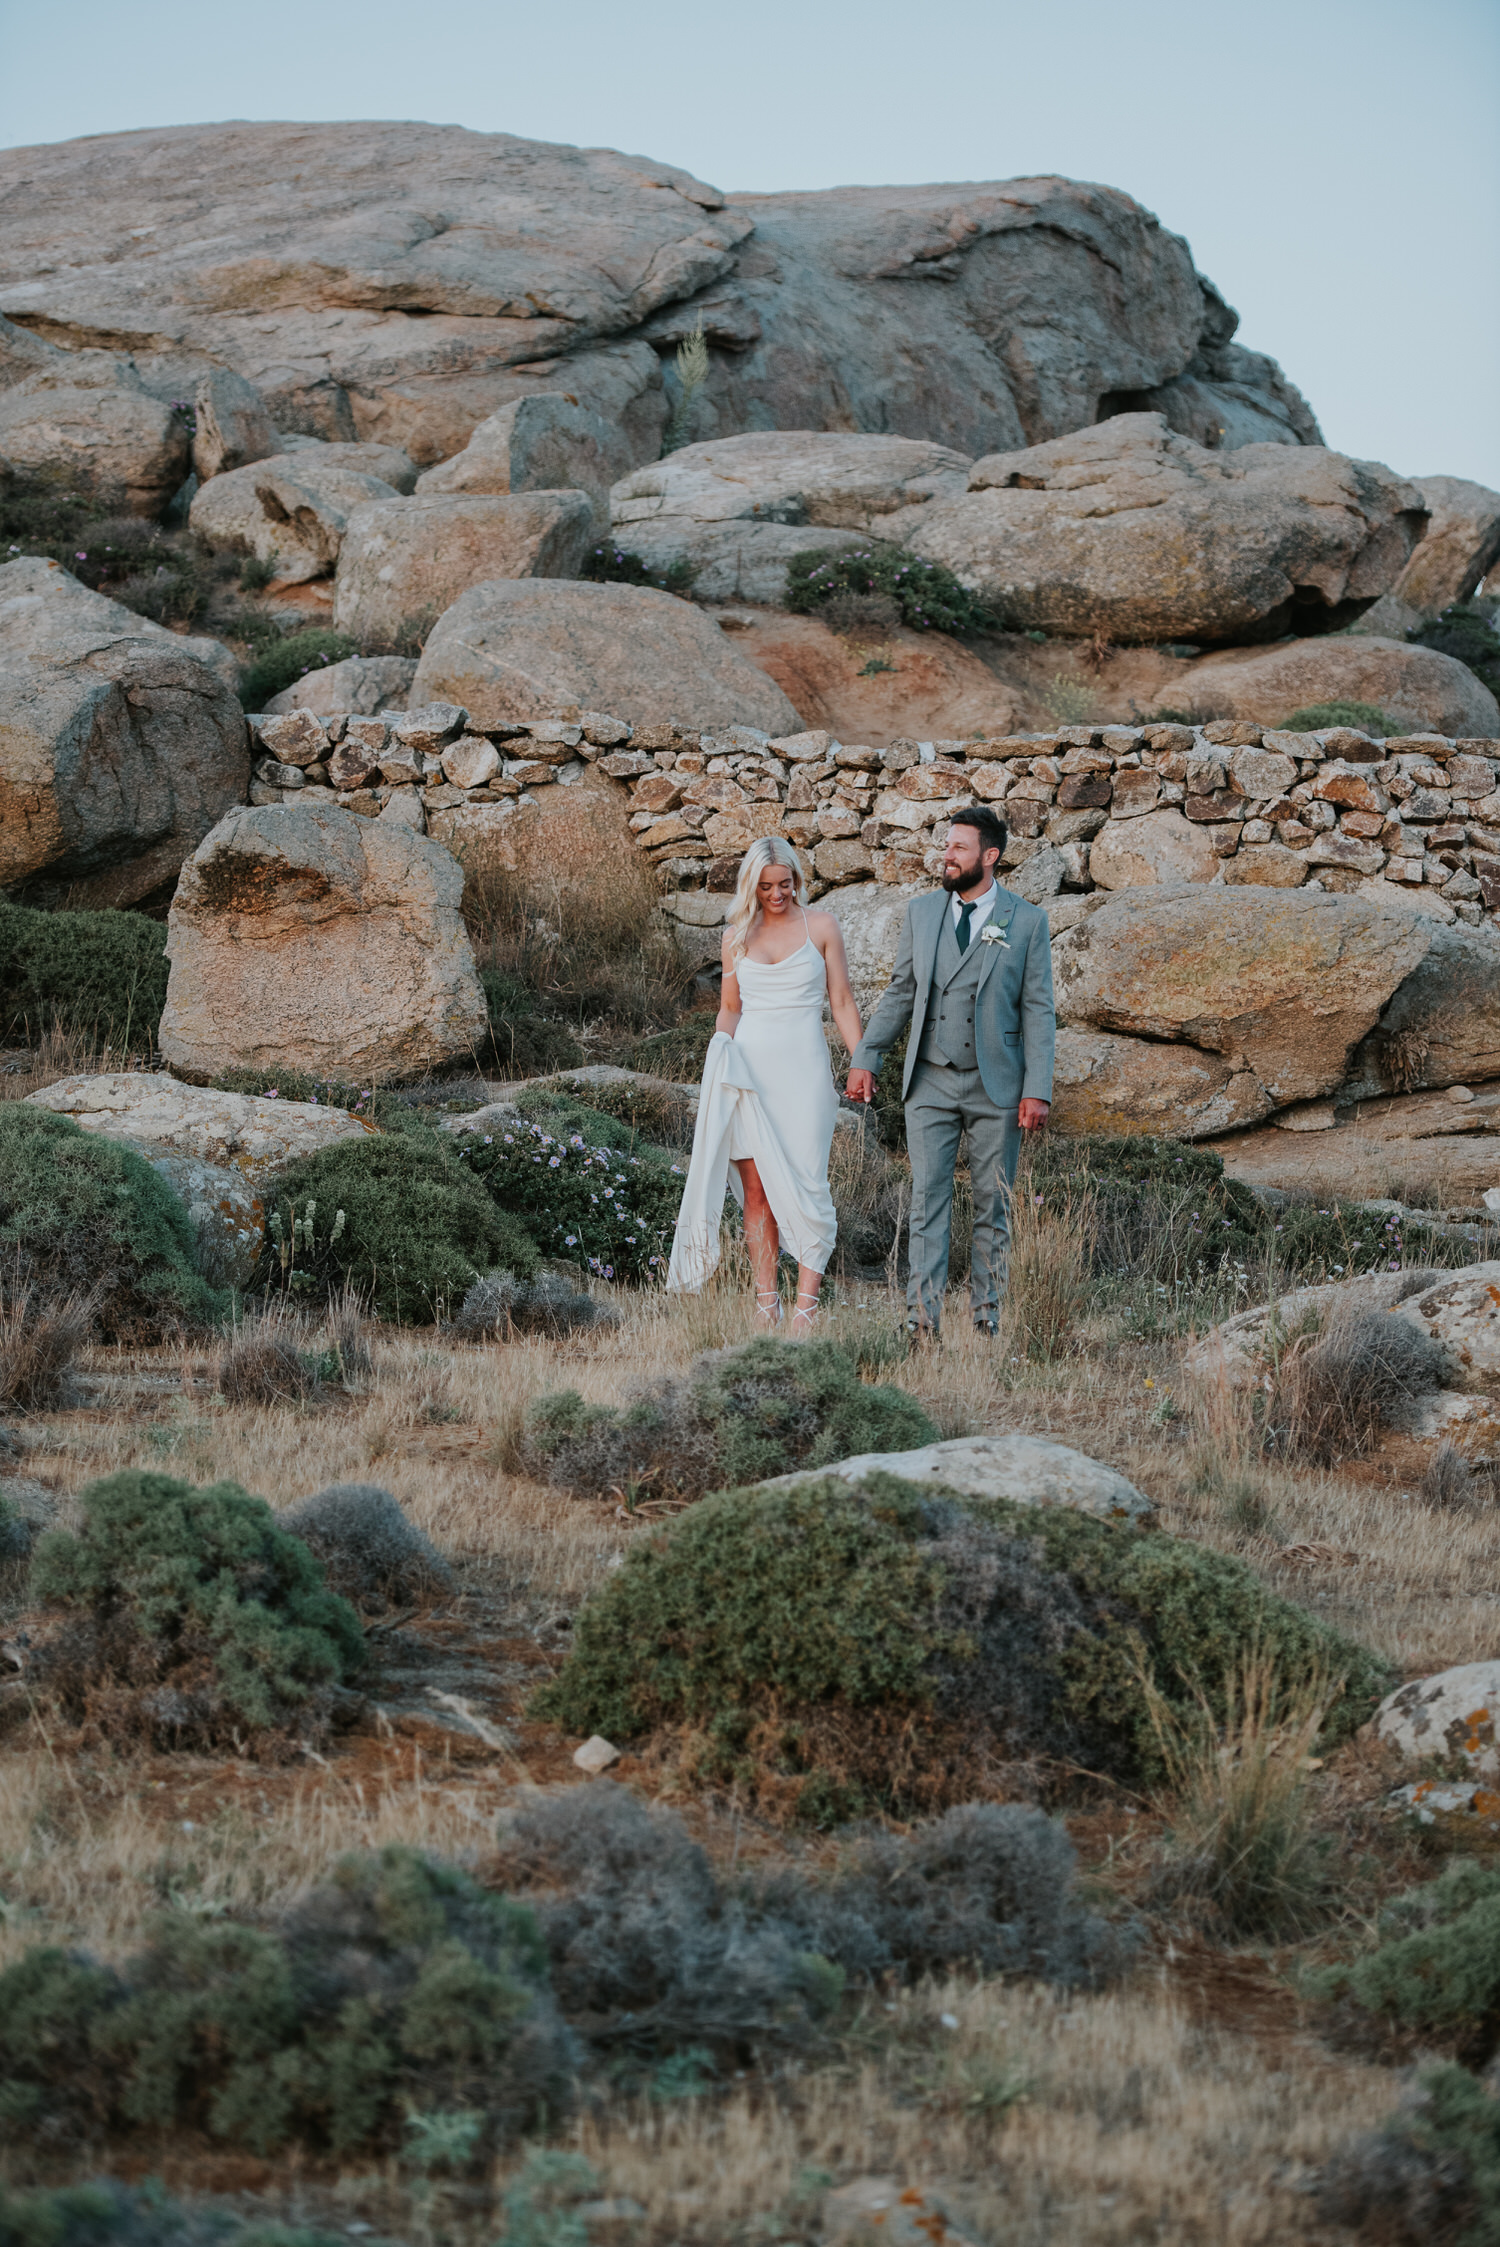 Mykonos wedding photographer: bride and groom in Mykonian landscape surrounded by rocks walking through grass.